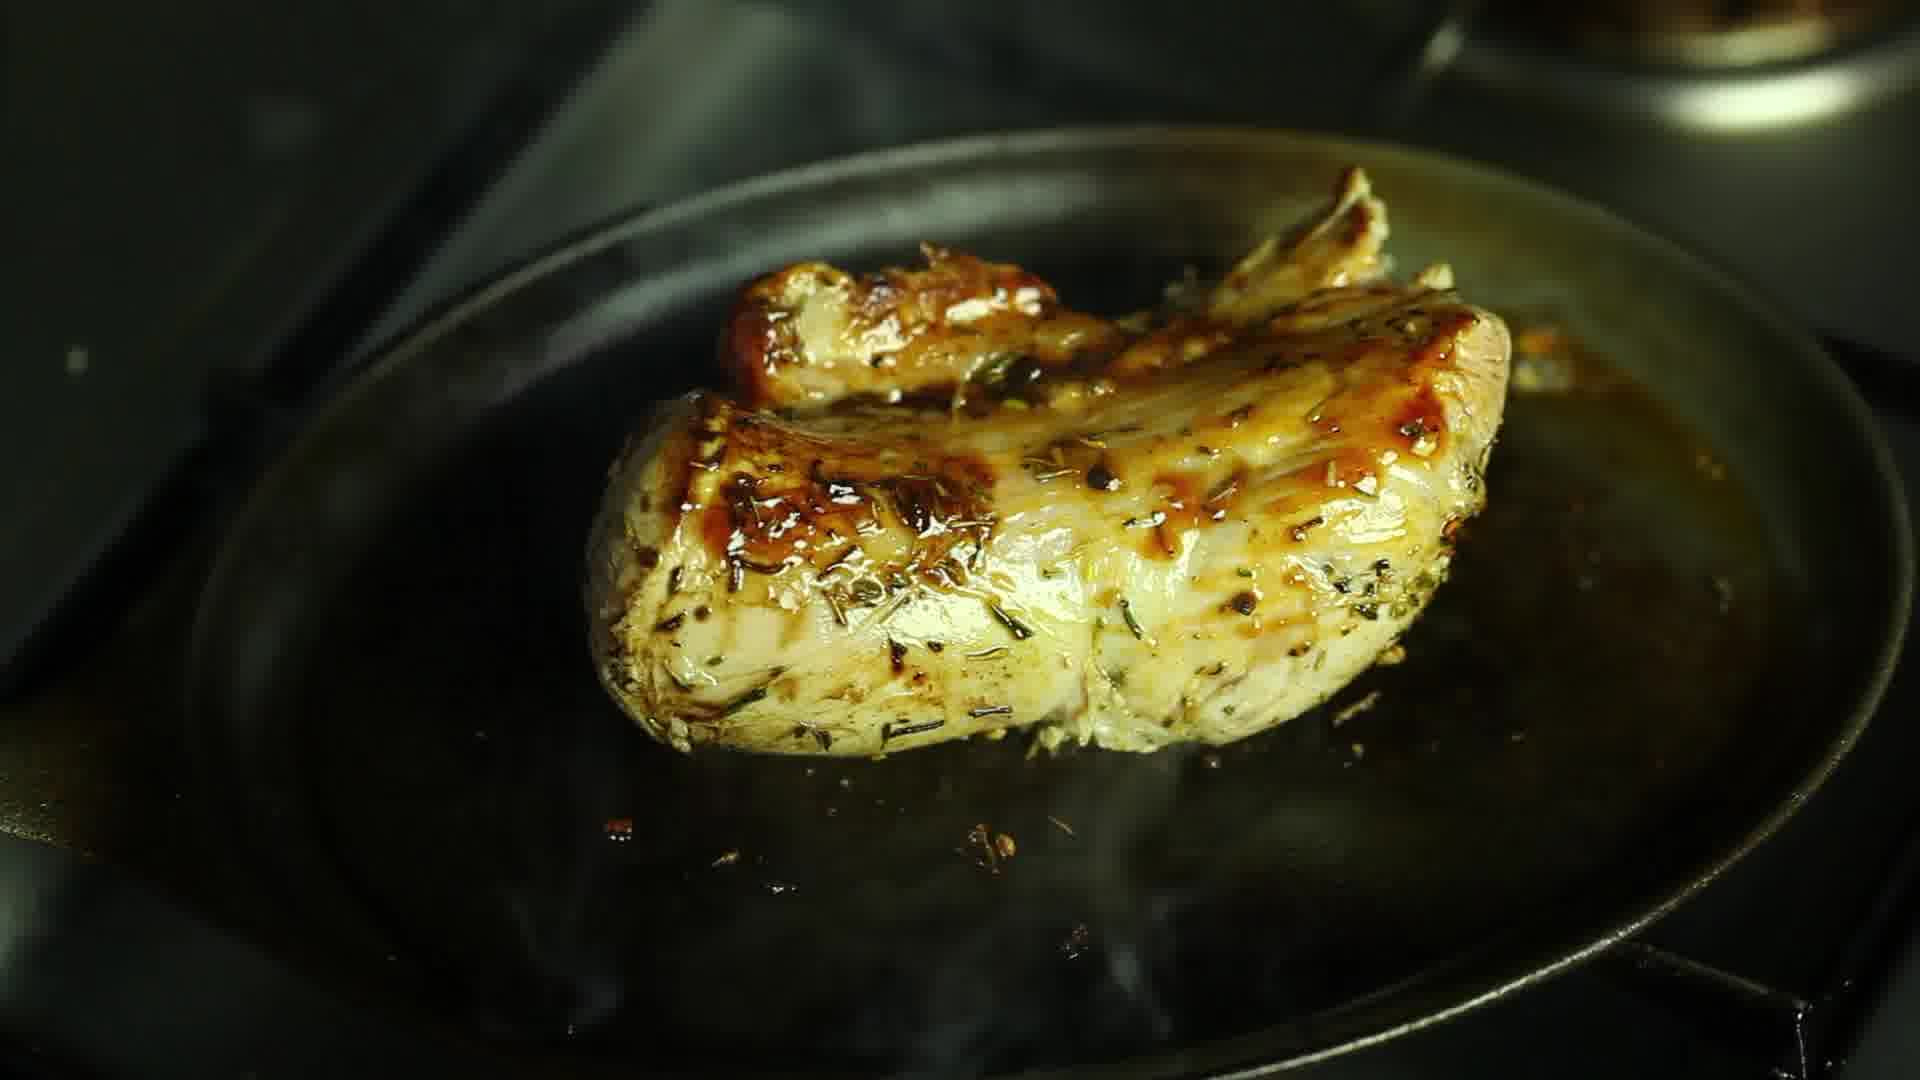 How To Cook A Pork Loin In The Oven
 How to Cook Pork Tenderloin in the Oven with